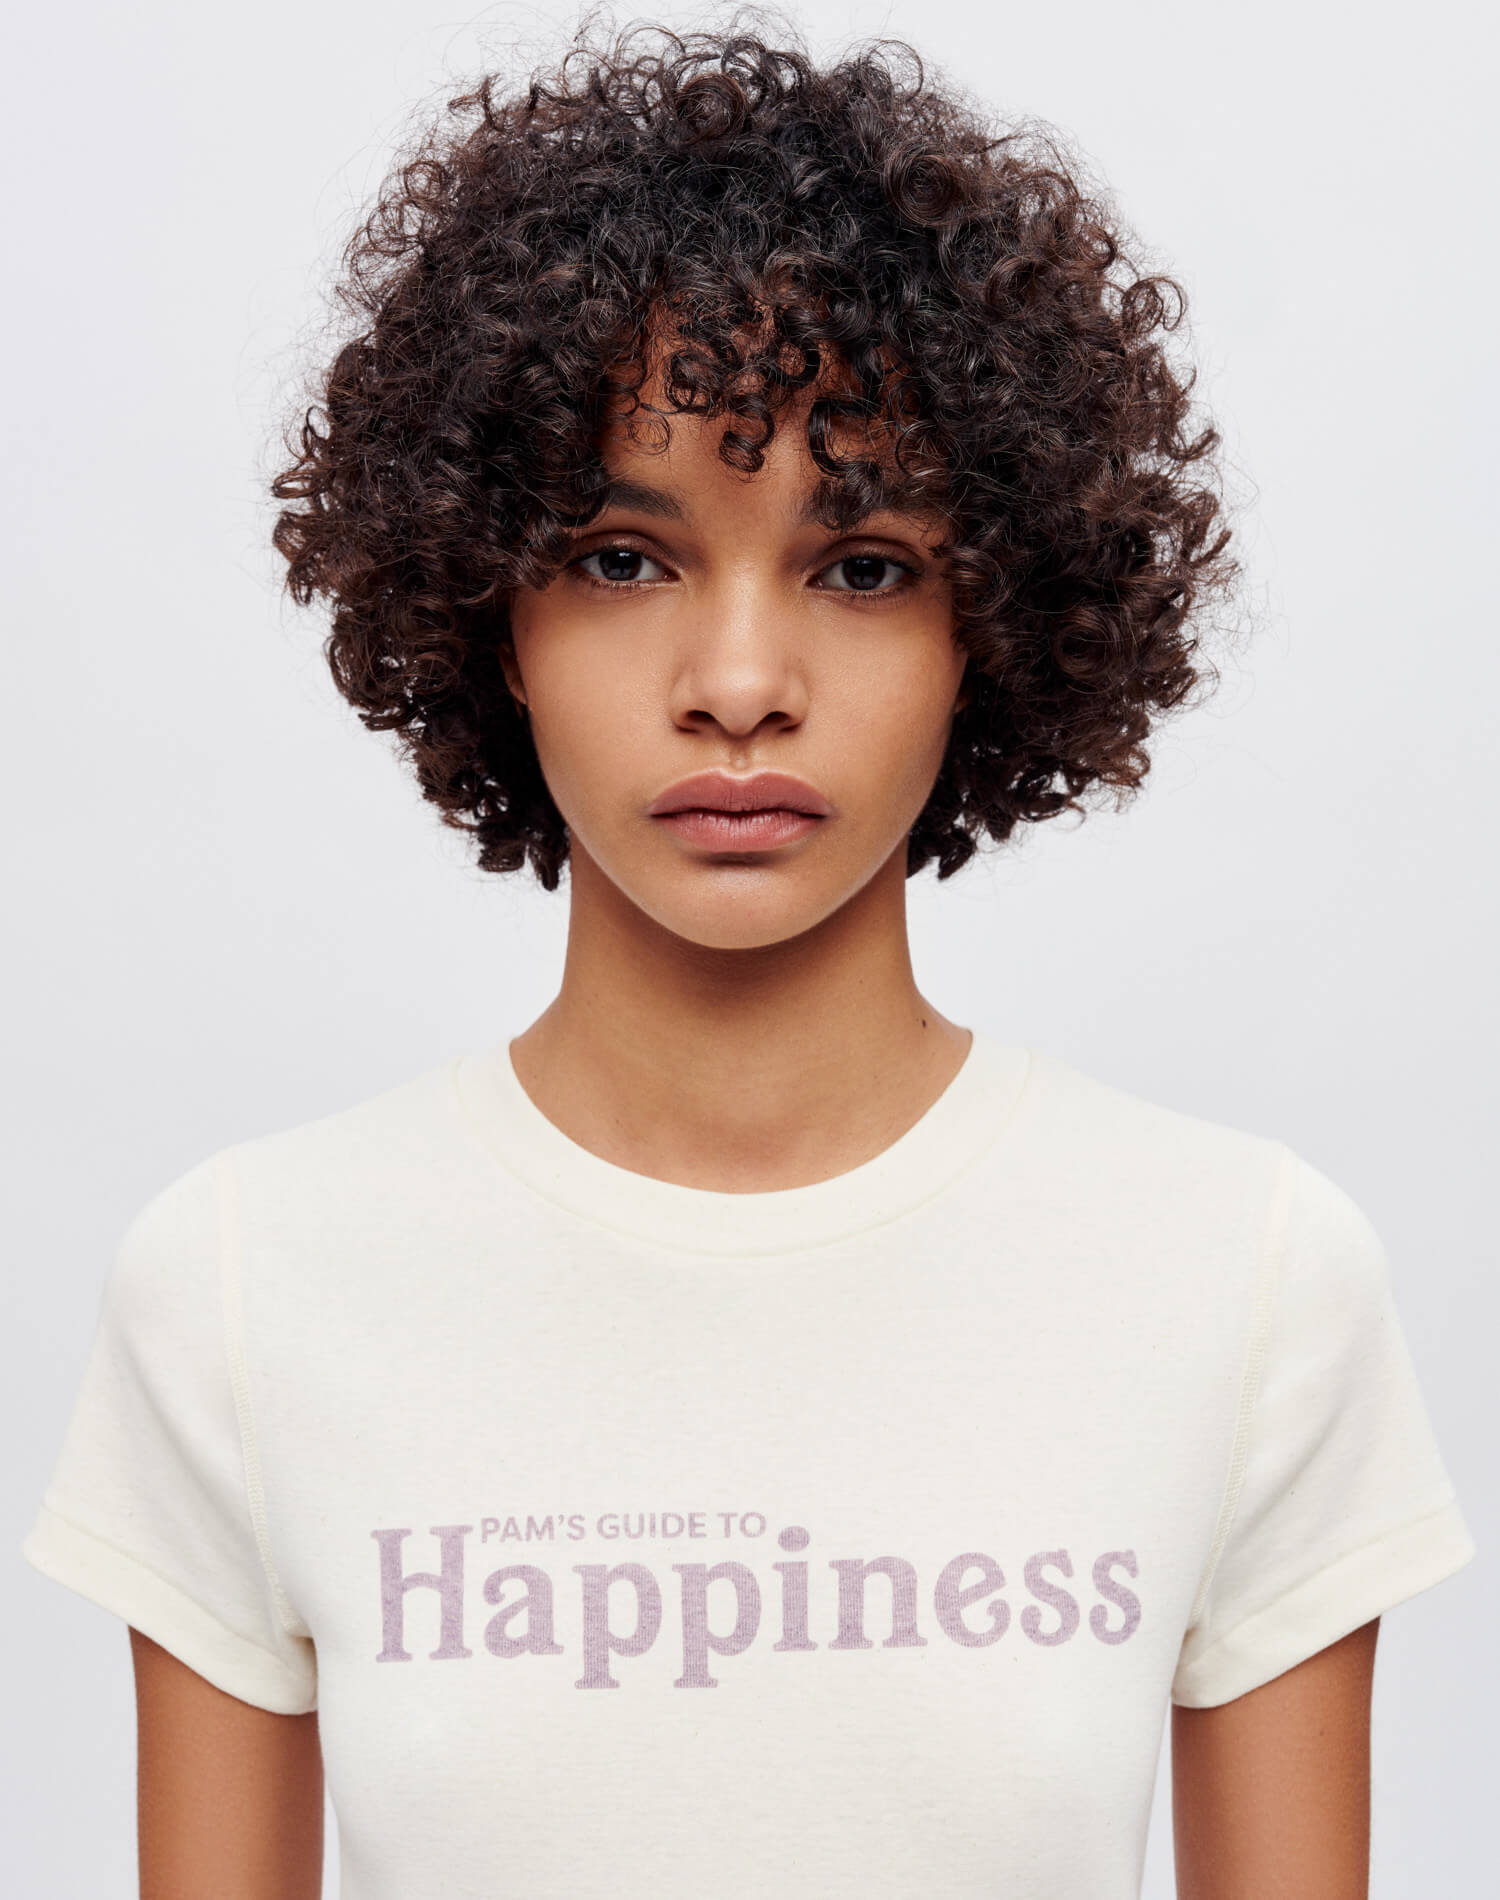 90s Baby "Pams Guide To Happiness" Tee - Naked